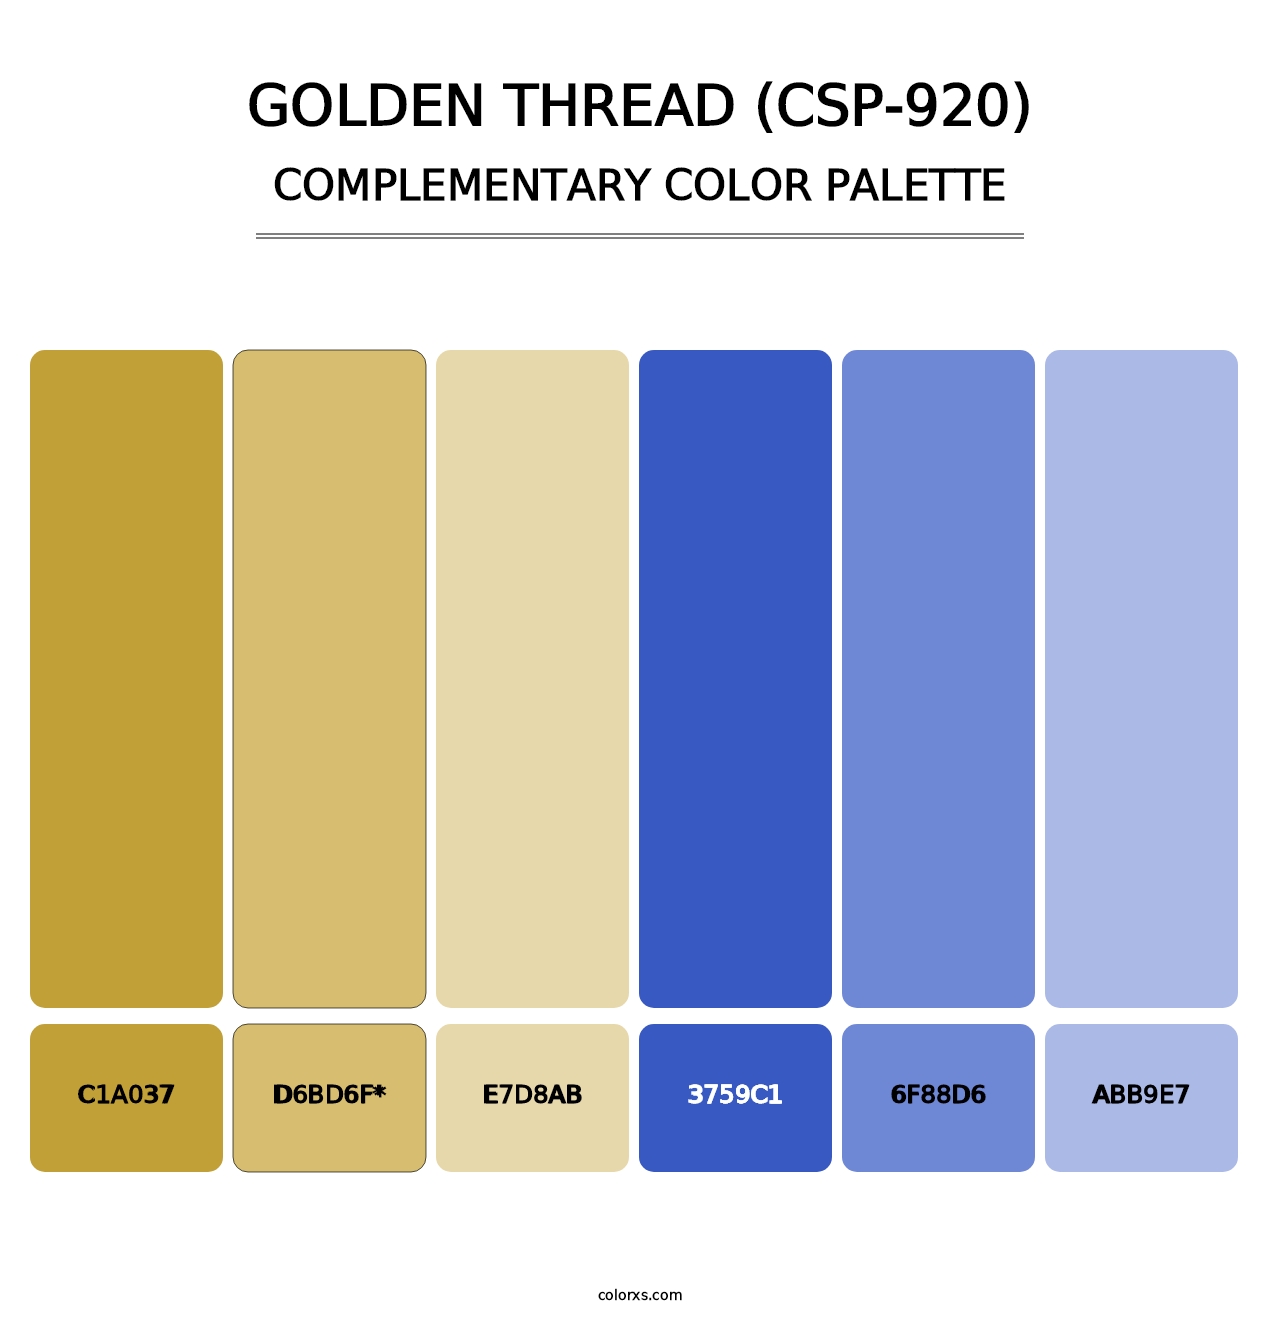 Golden Thread (CSP-920) - Complementary Color Palette